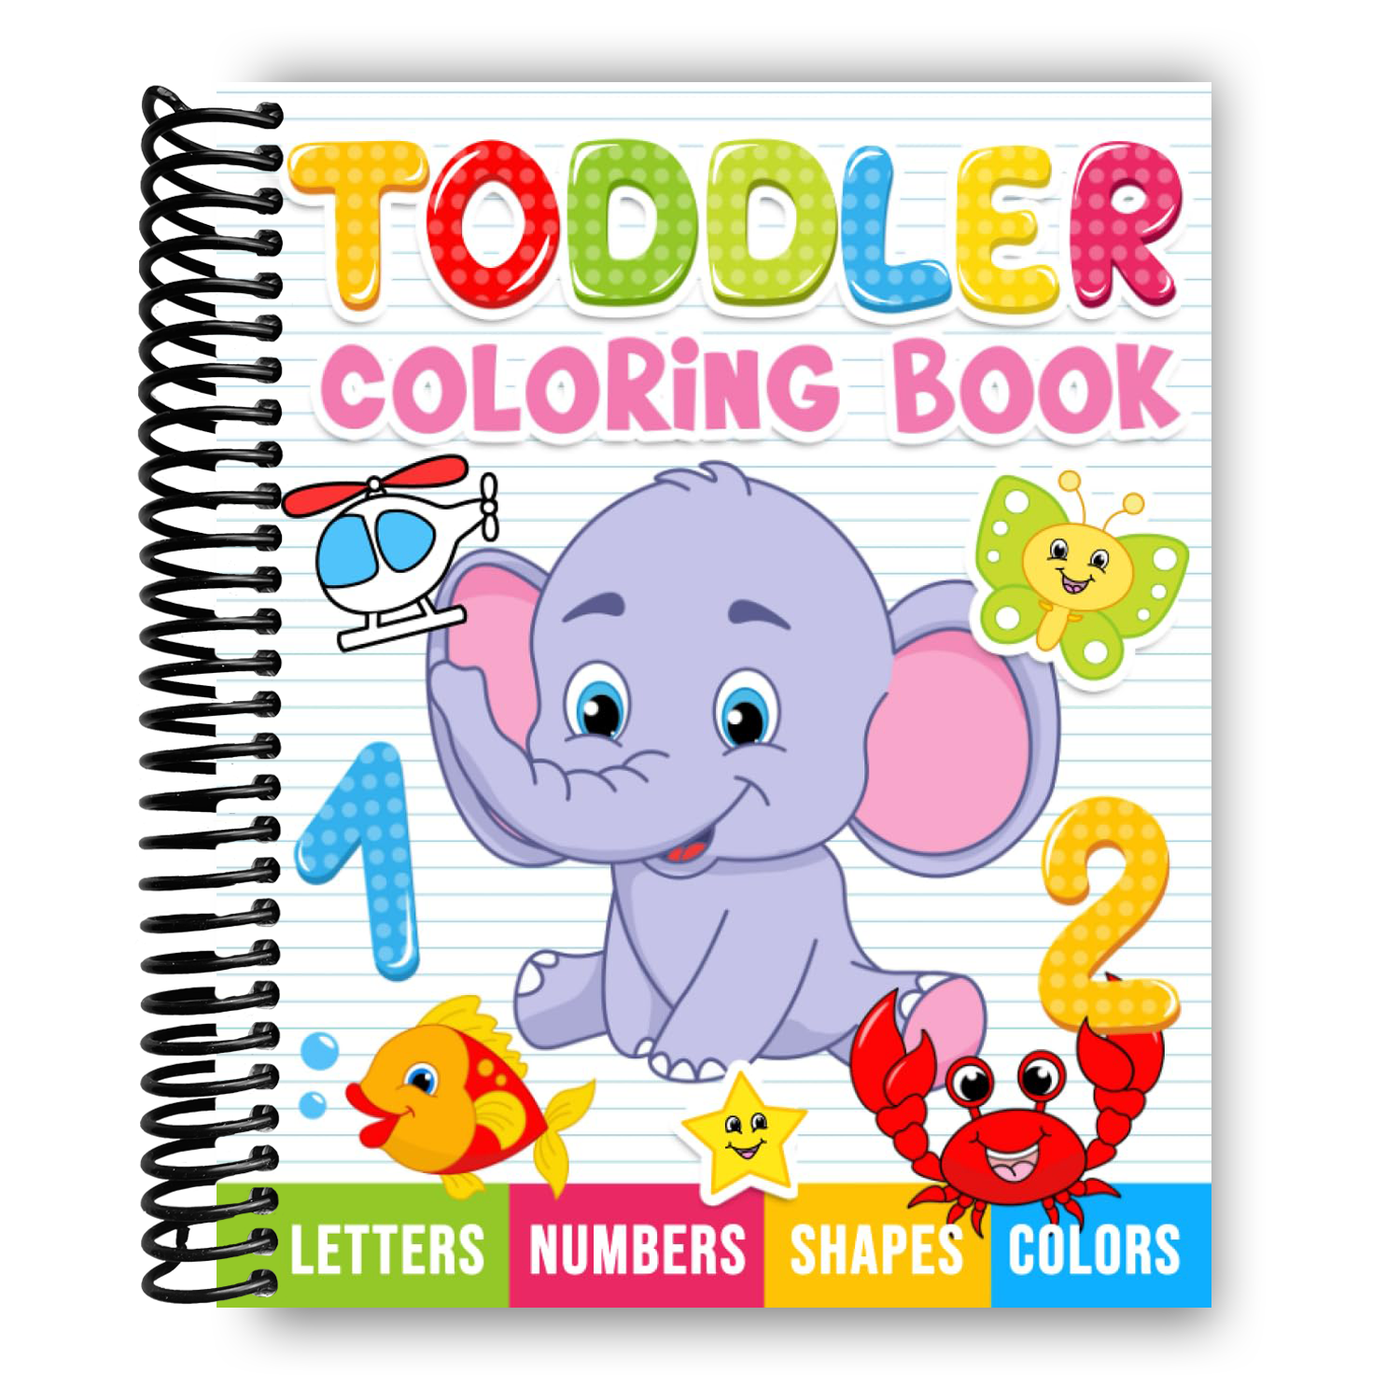 Toddler Coloring Book: Numbers, Letters, Shapes and Animals, Coloring Book for kids, Age 1-3, Preschool Coloring Book (Spiral Bound)